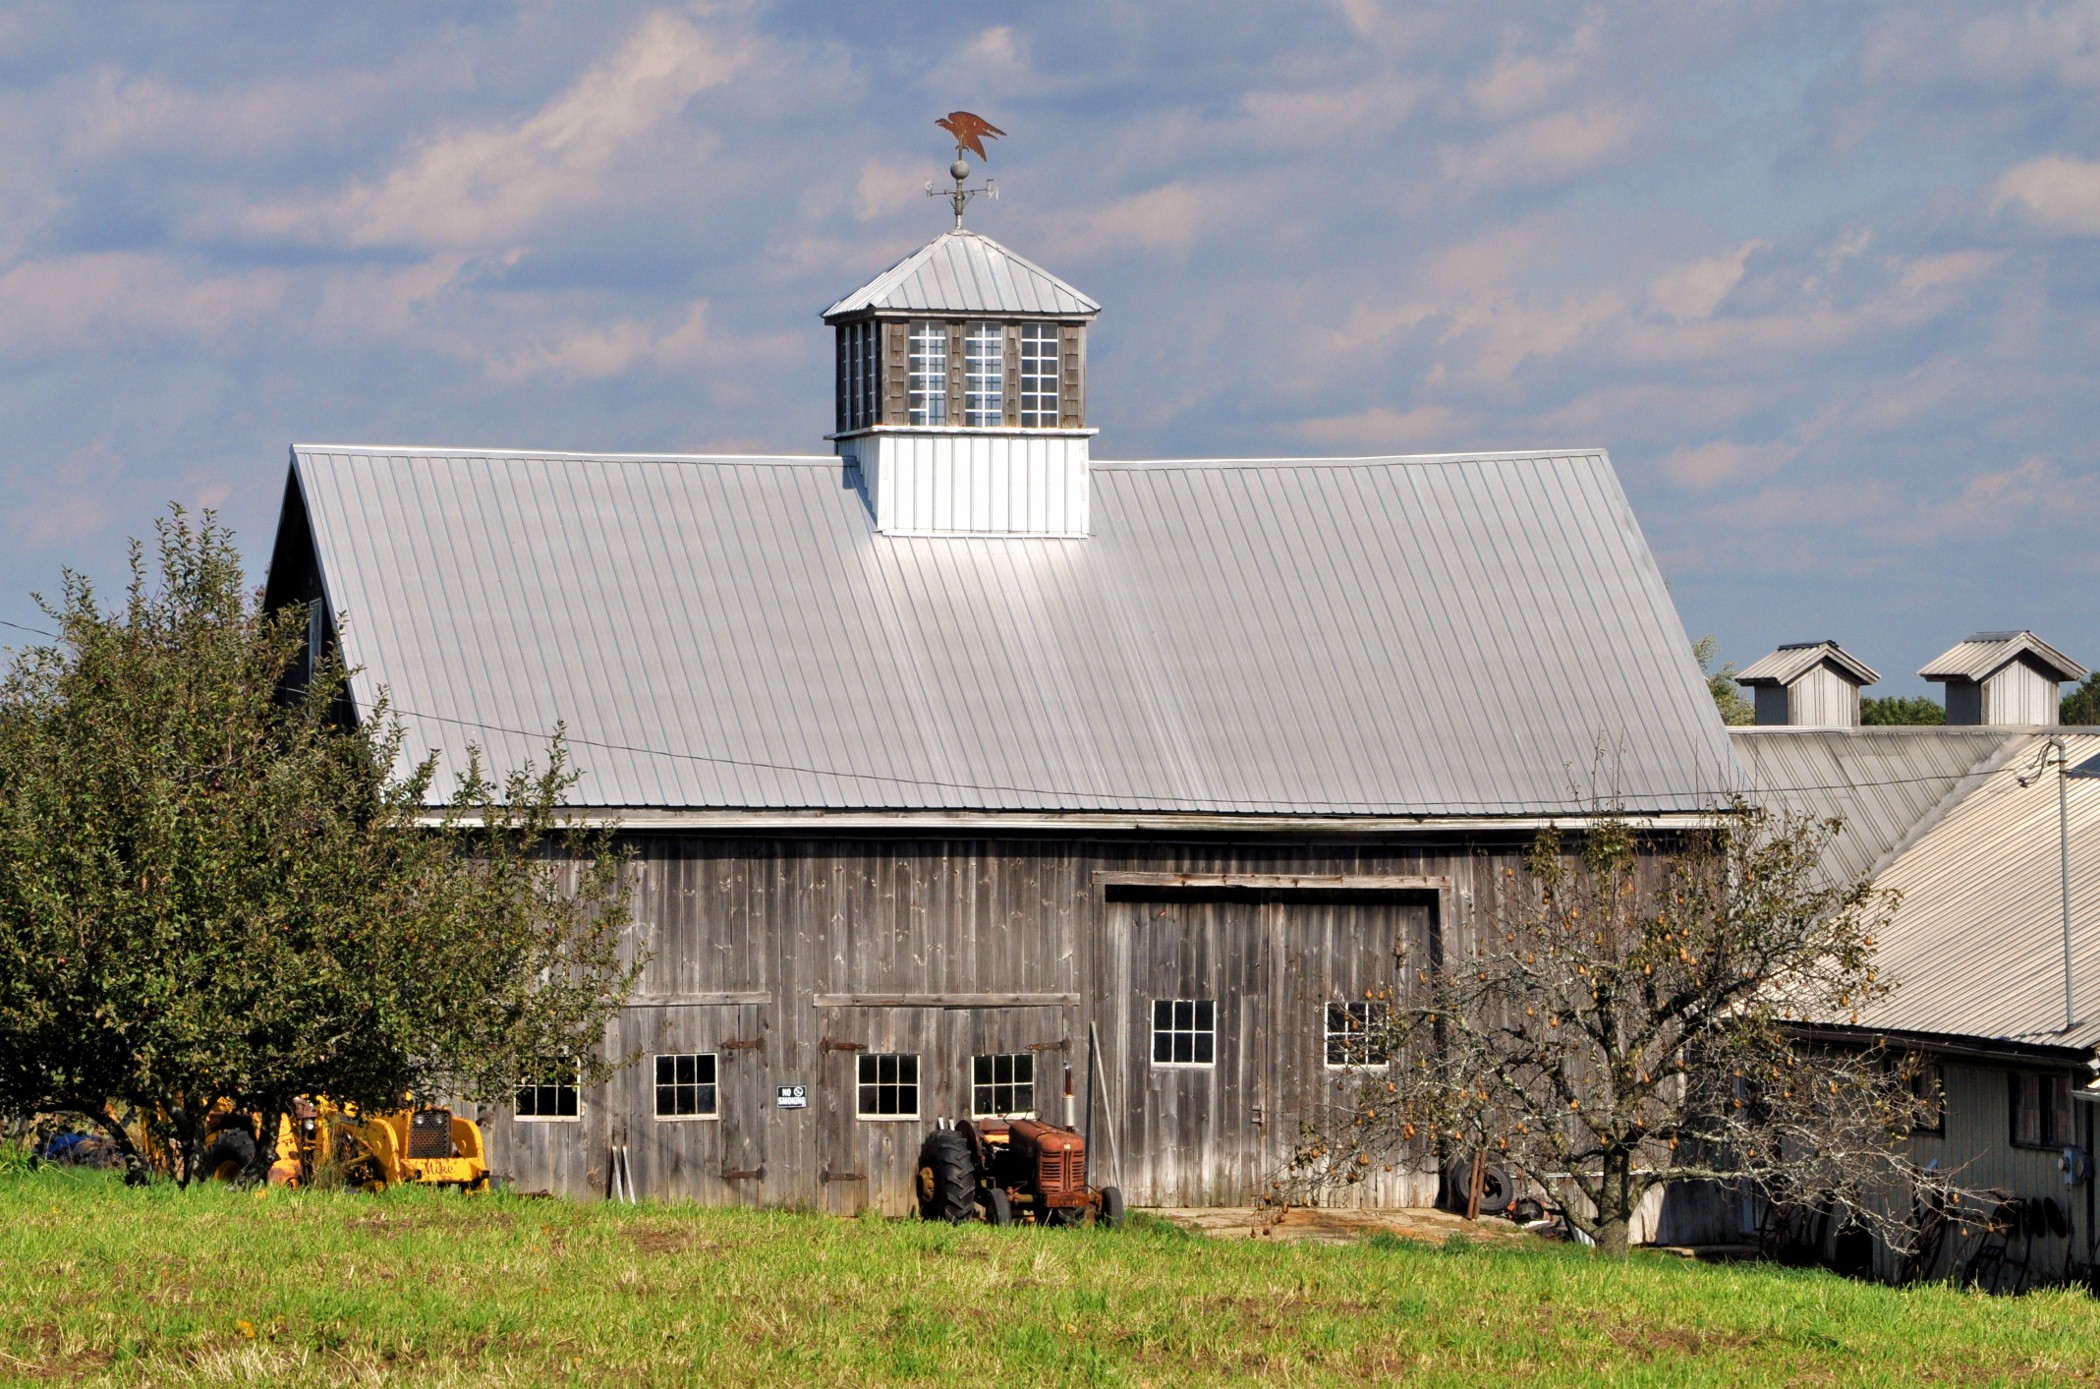 Apple Trees And Barn (user submitted)